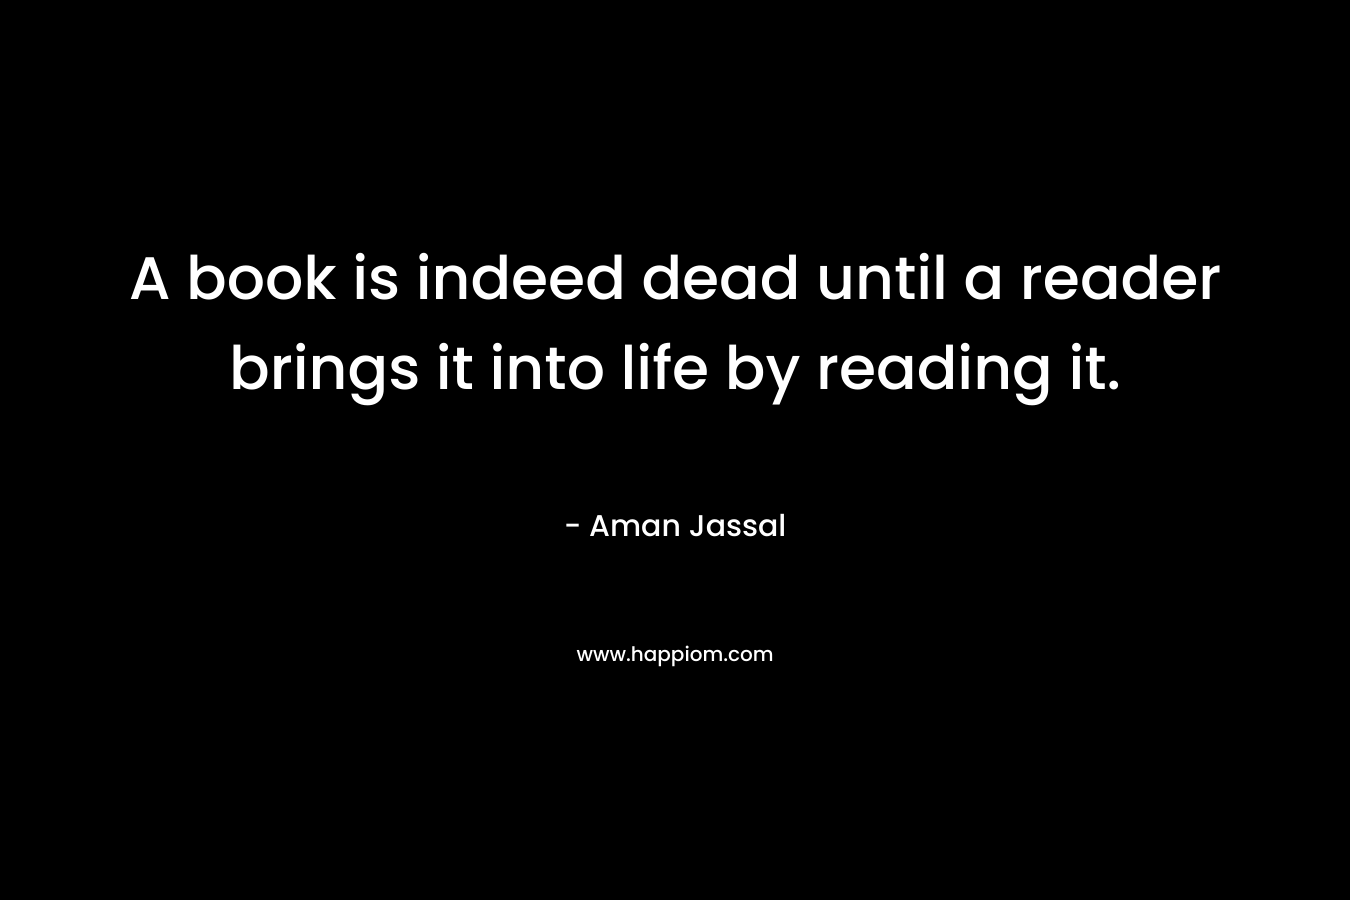 A book is indeed dead until a reader brings it into life by reading it. – Aman Jassal